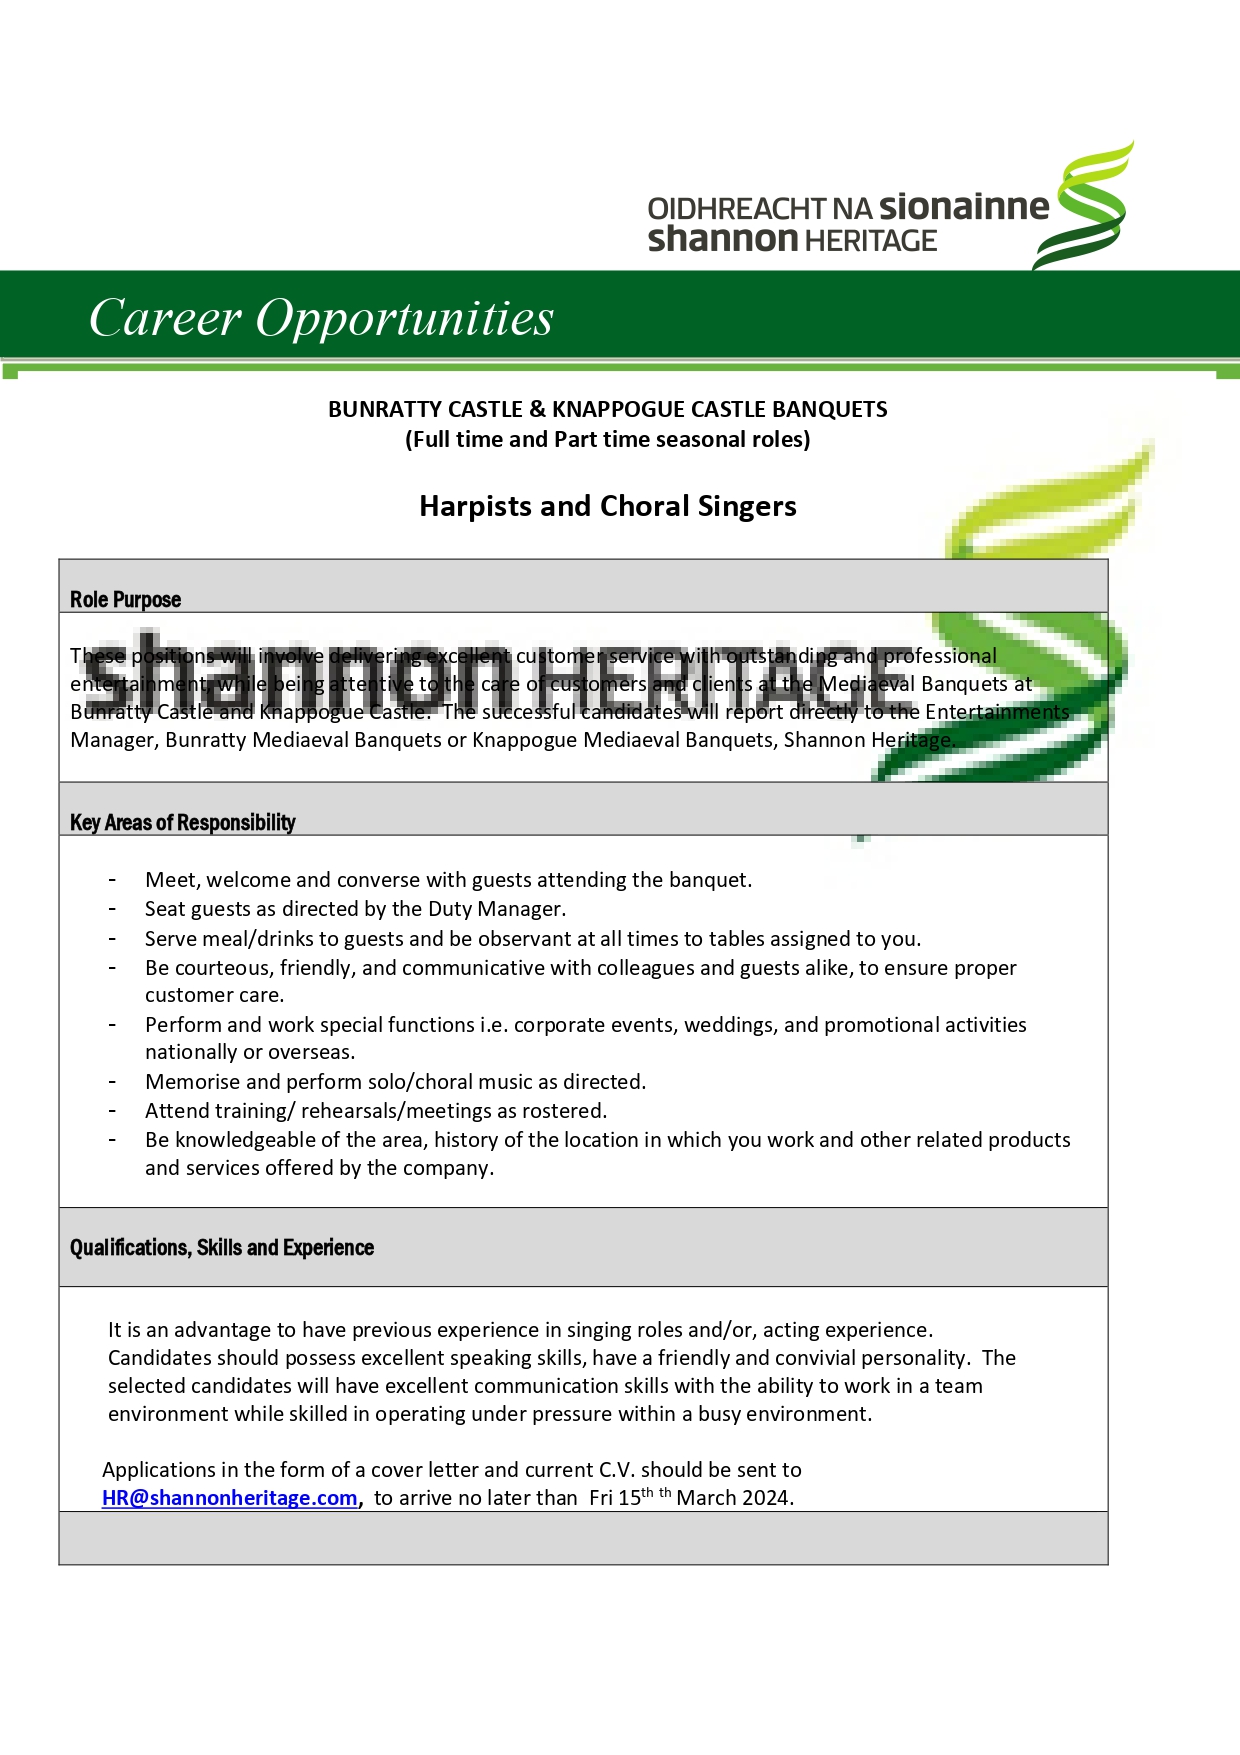 Ad for job positions for Harpist Choral Singers Feb 27th 2024  page 0001